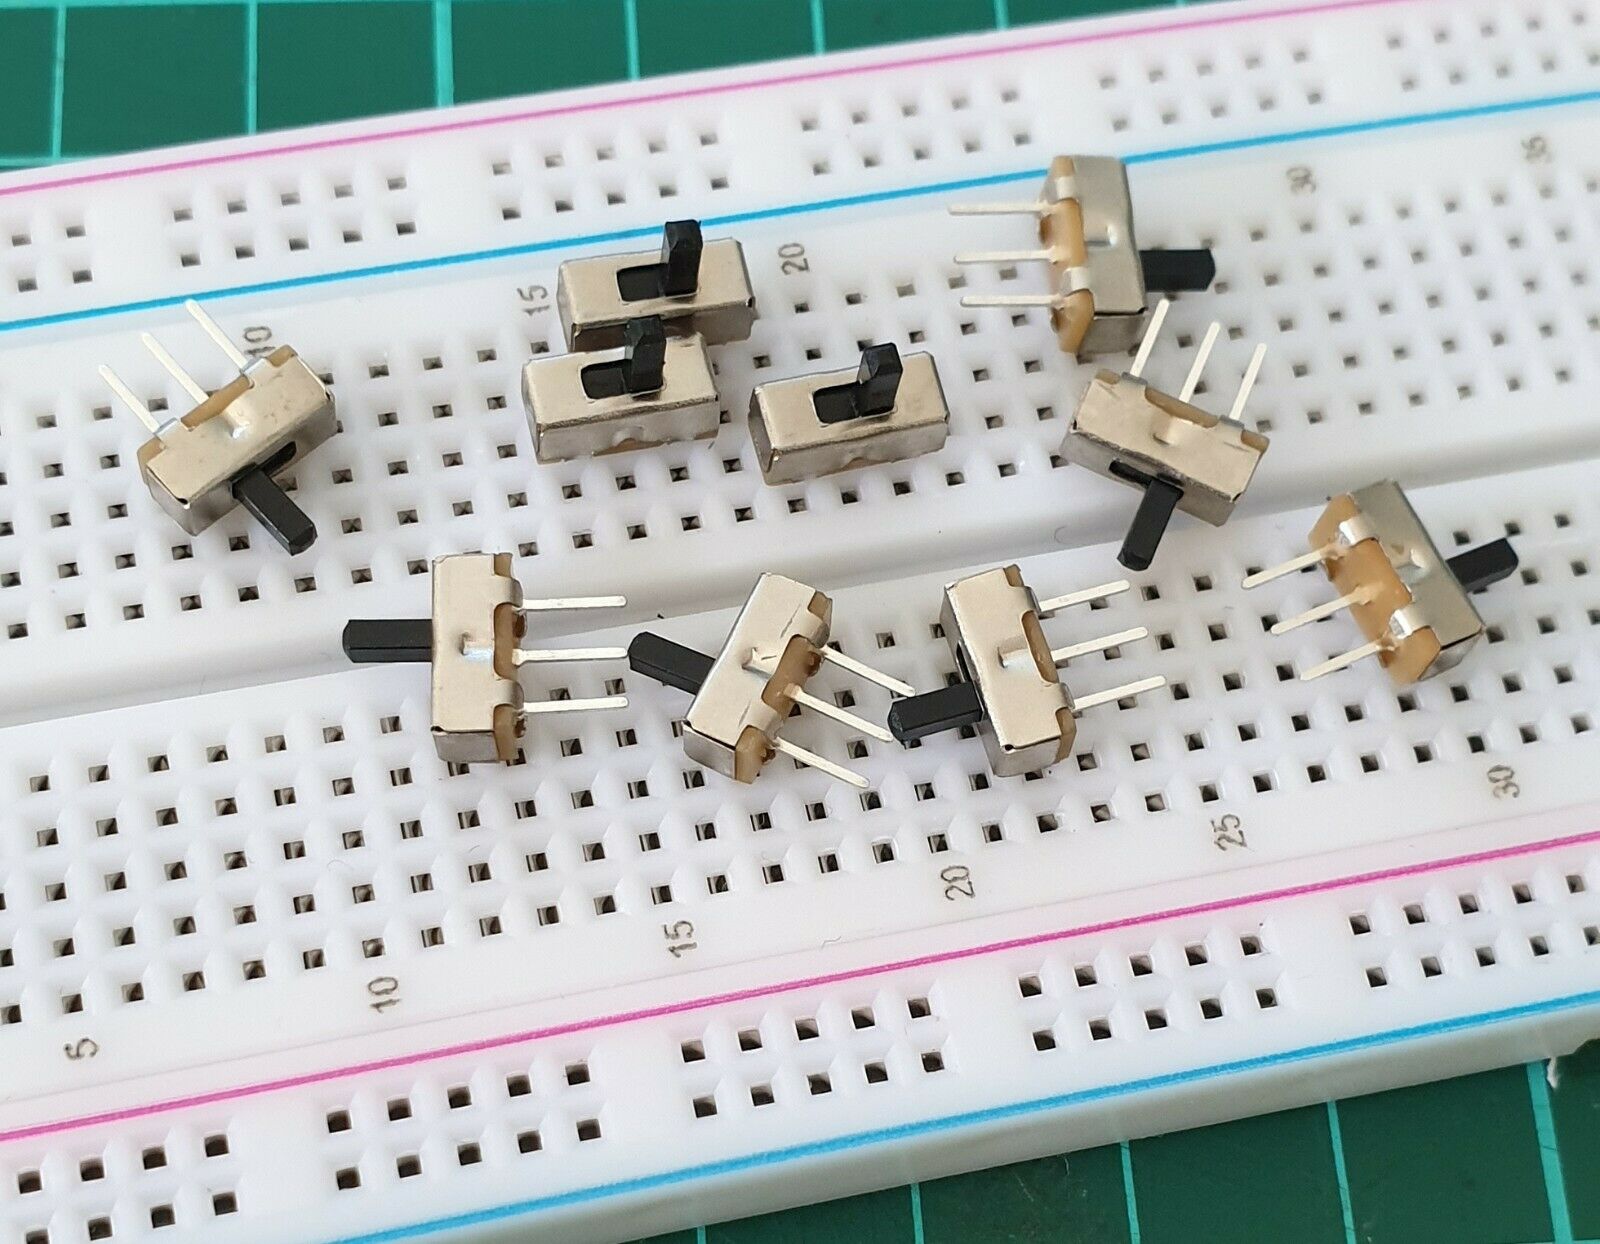 Why pay more? Breadboard-friendly SPDT Slide Switches